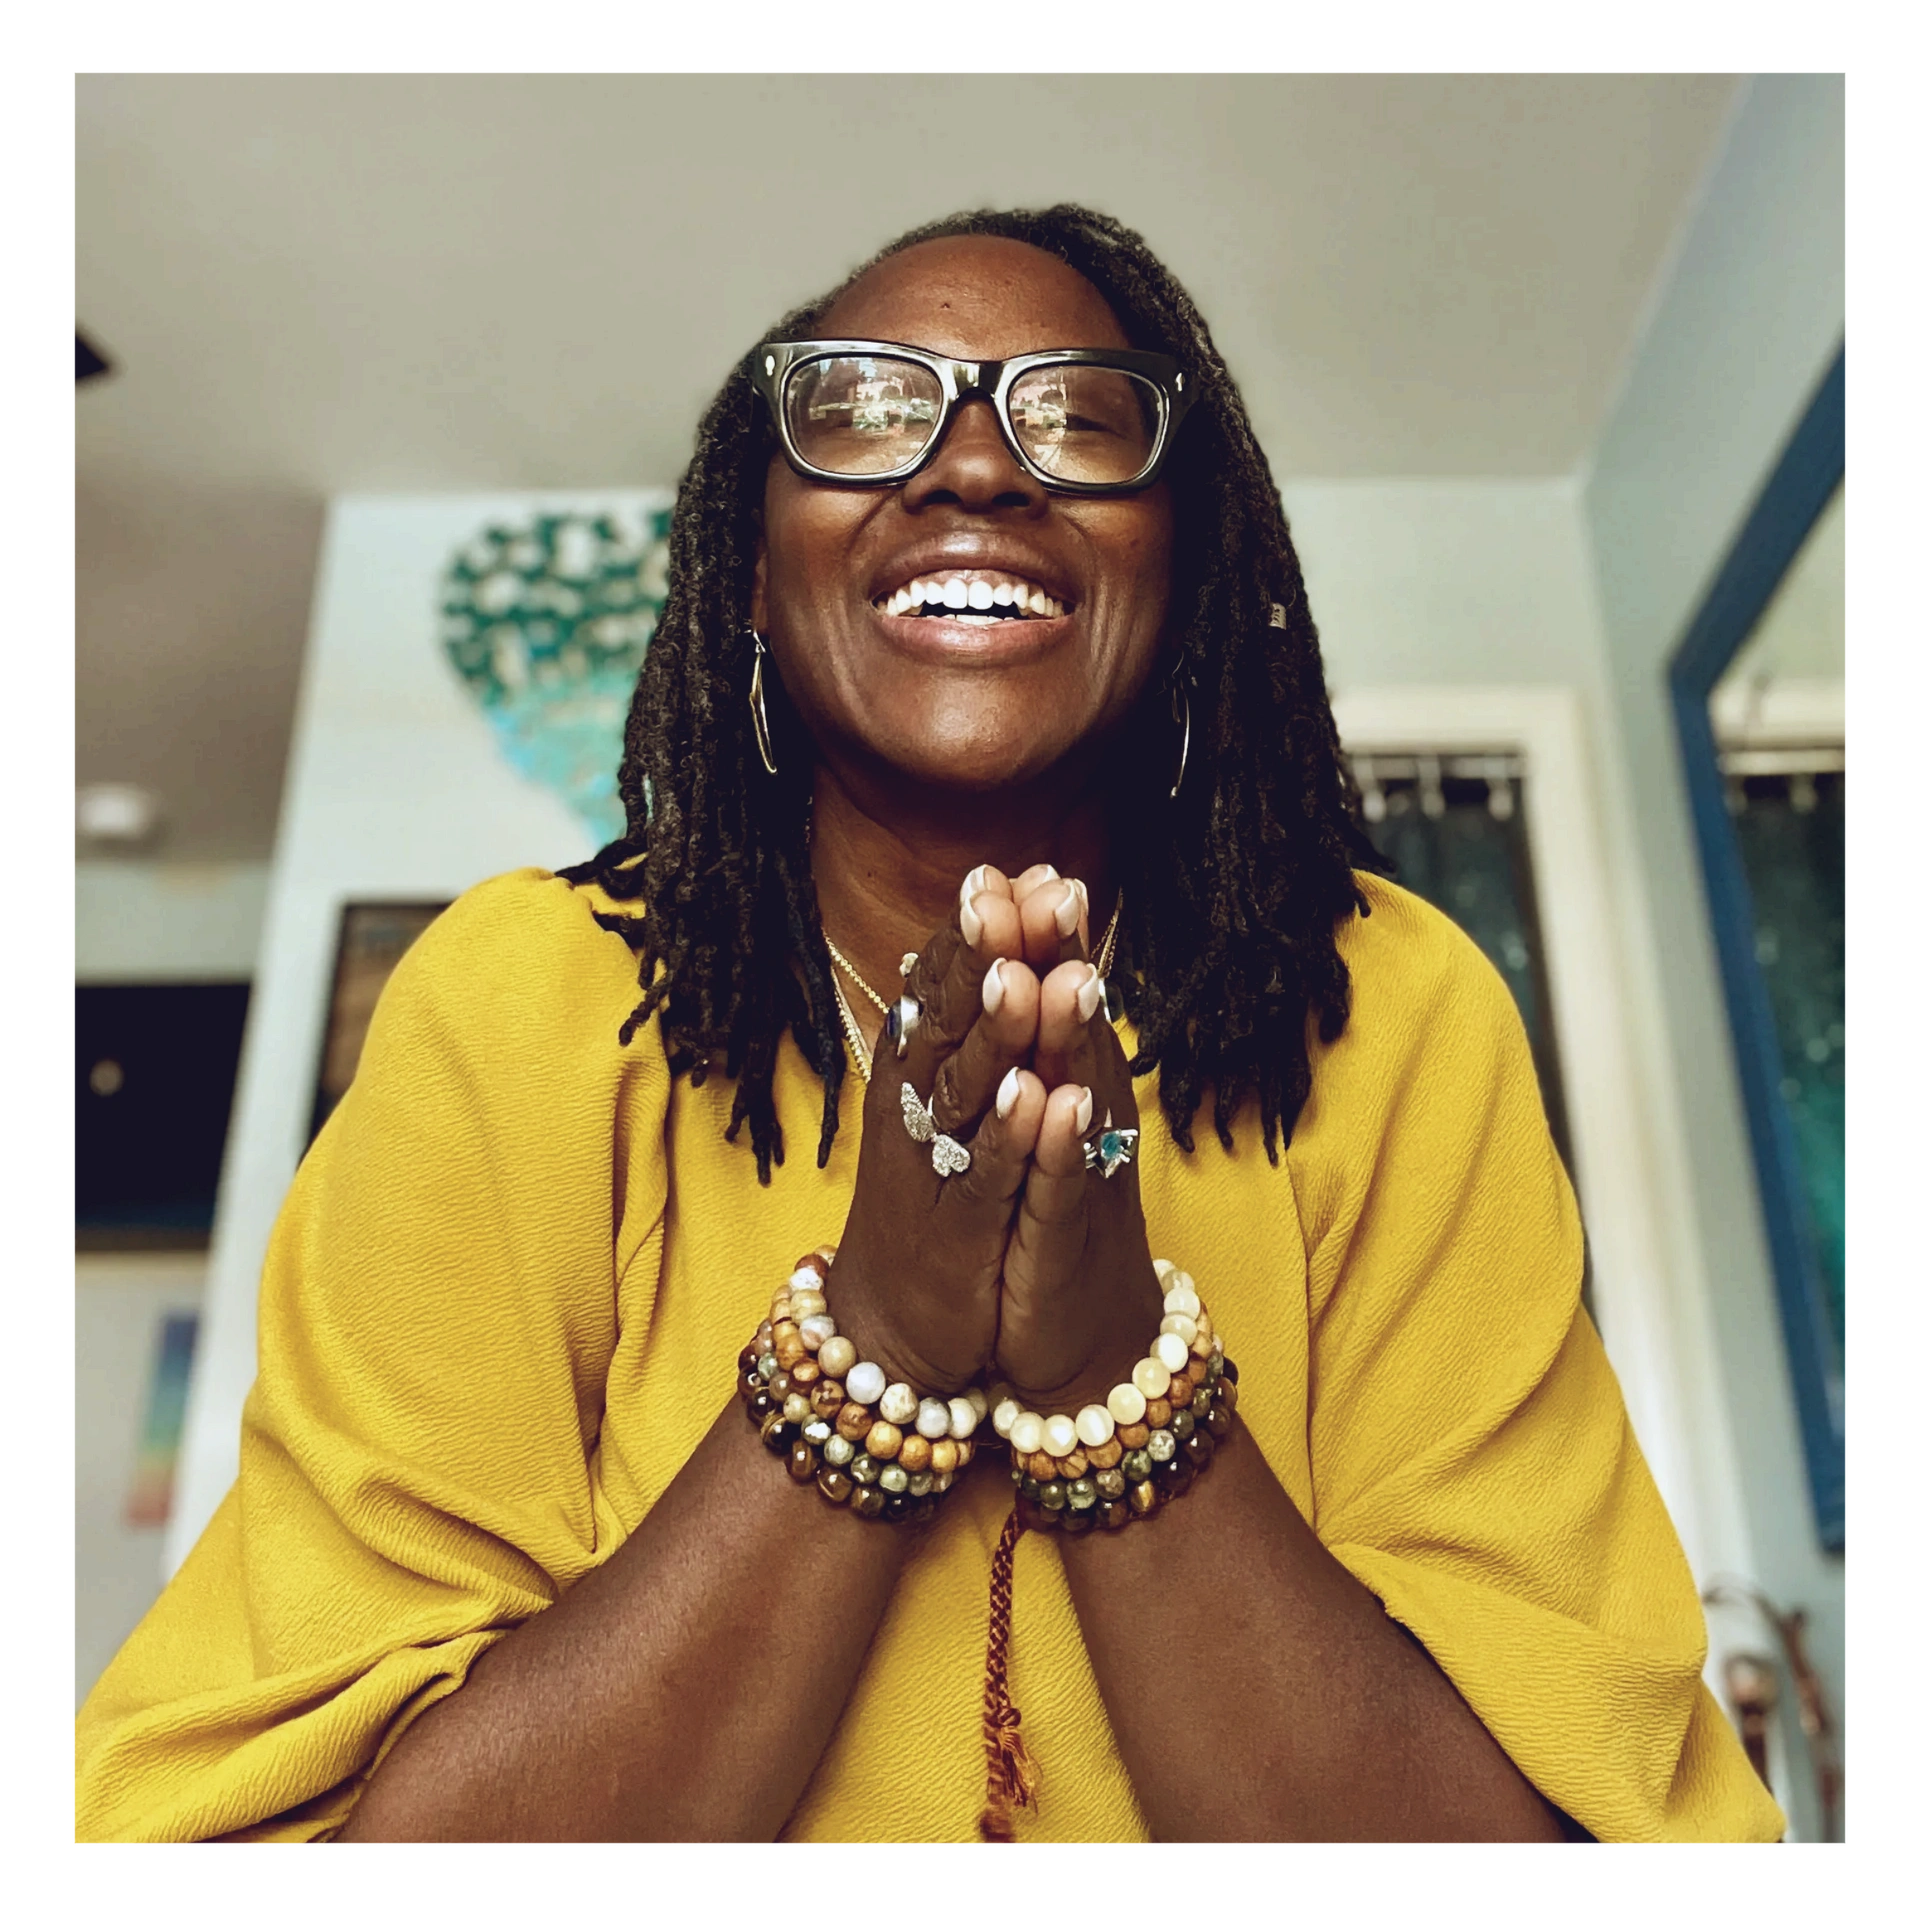 Dr. Makeba joyfully smiles with a gold shirt with hands in a prayer position.